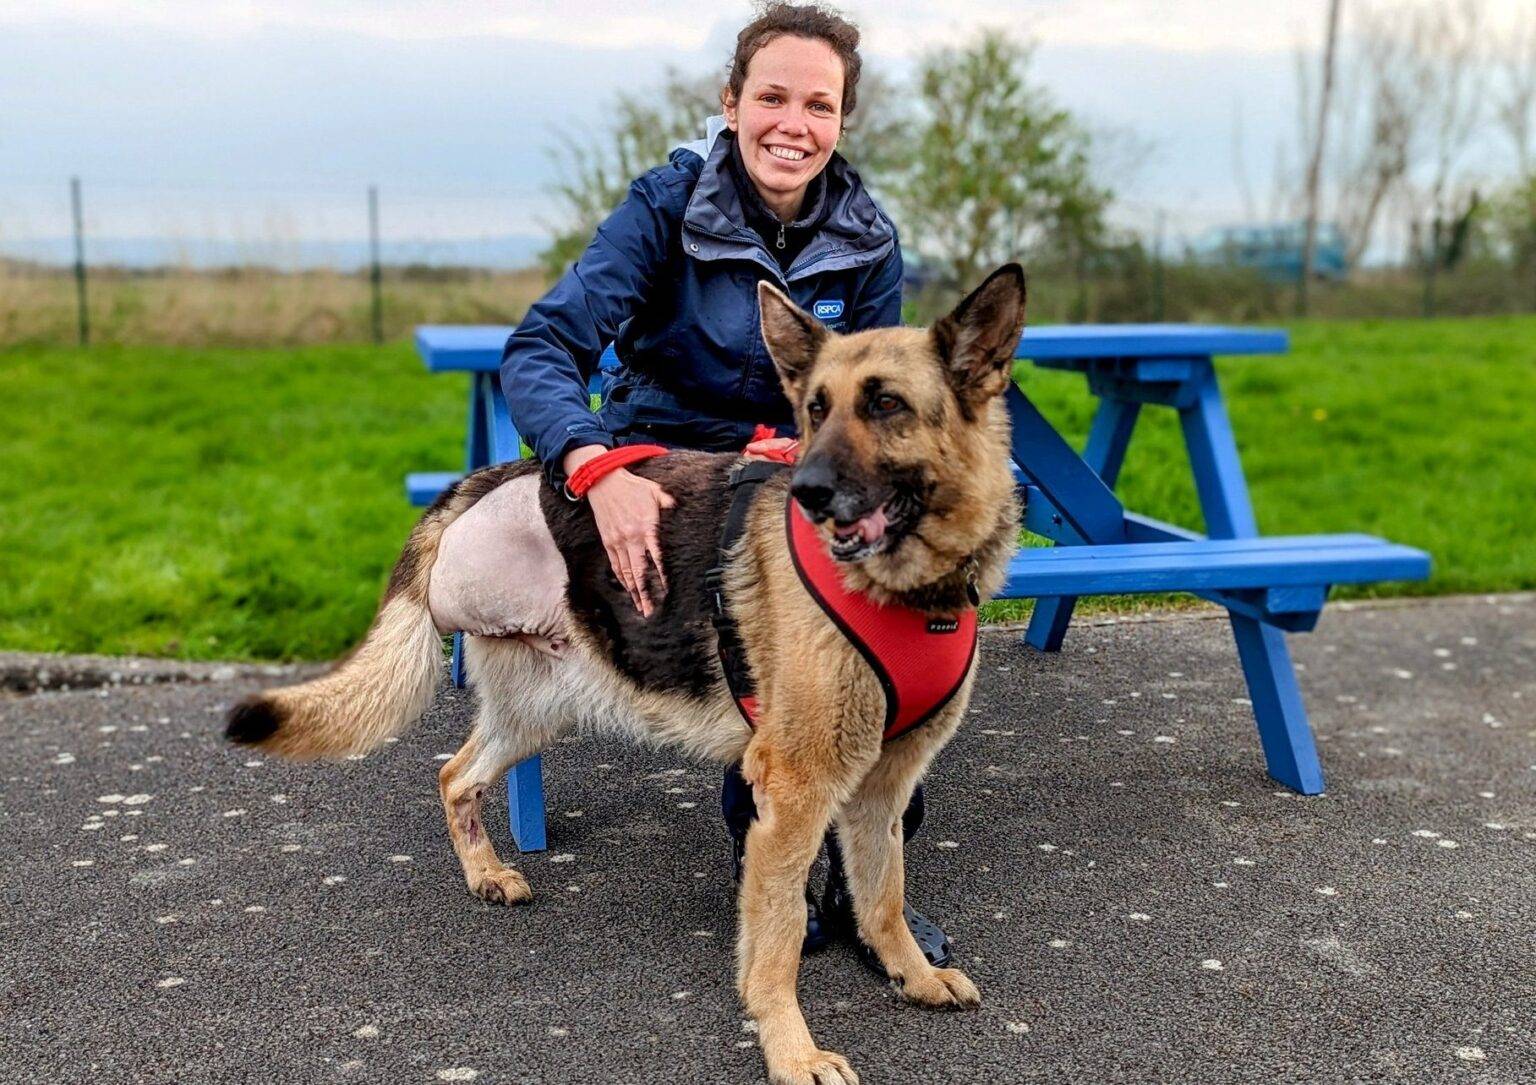 Three-legged German Shepherd finally finds forever home after long 209-day wait in shelter